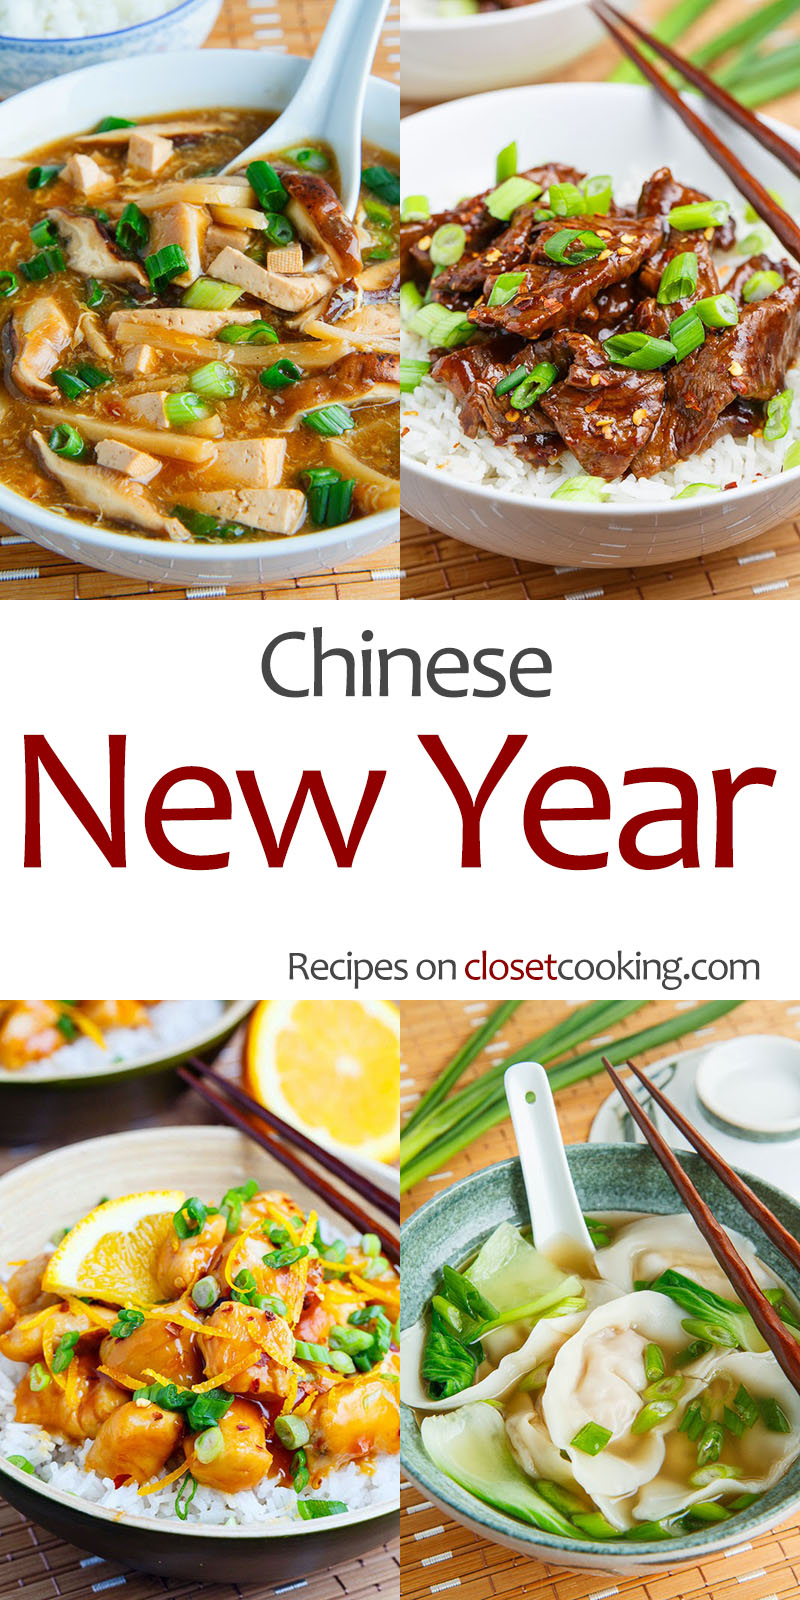 Recipes for the Chinese New Year